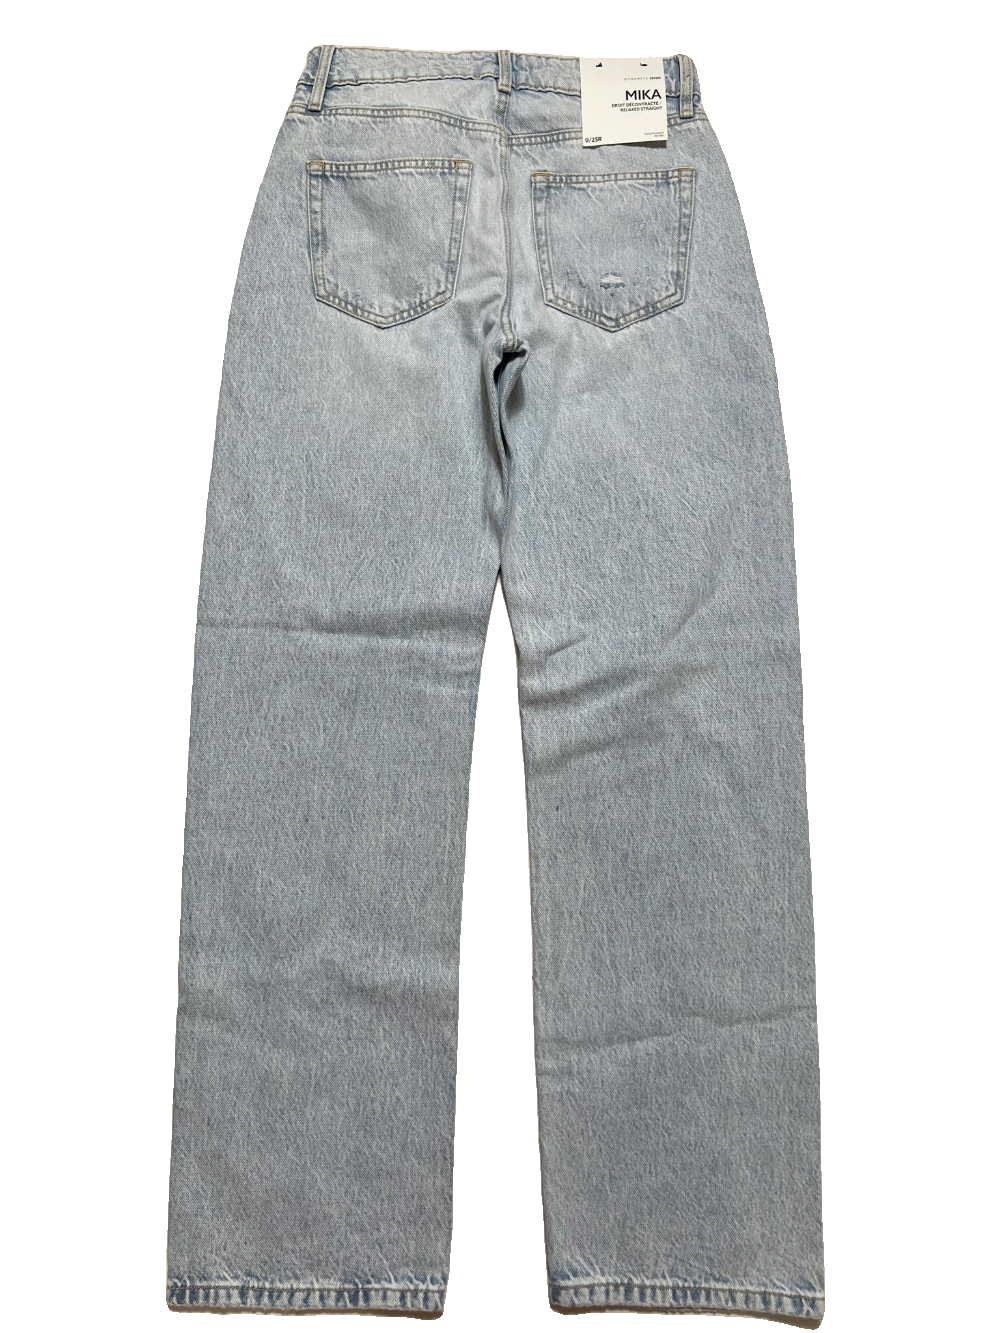 Dynamite Denim- Light Wash "Mika" Jeans NEW WITH TAGS!